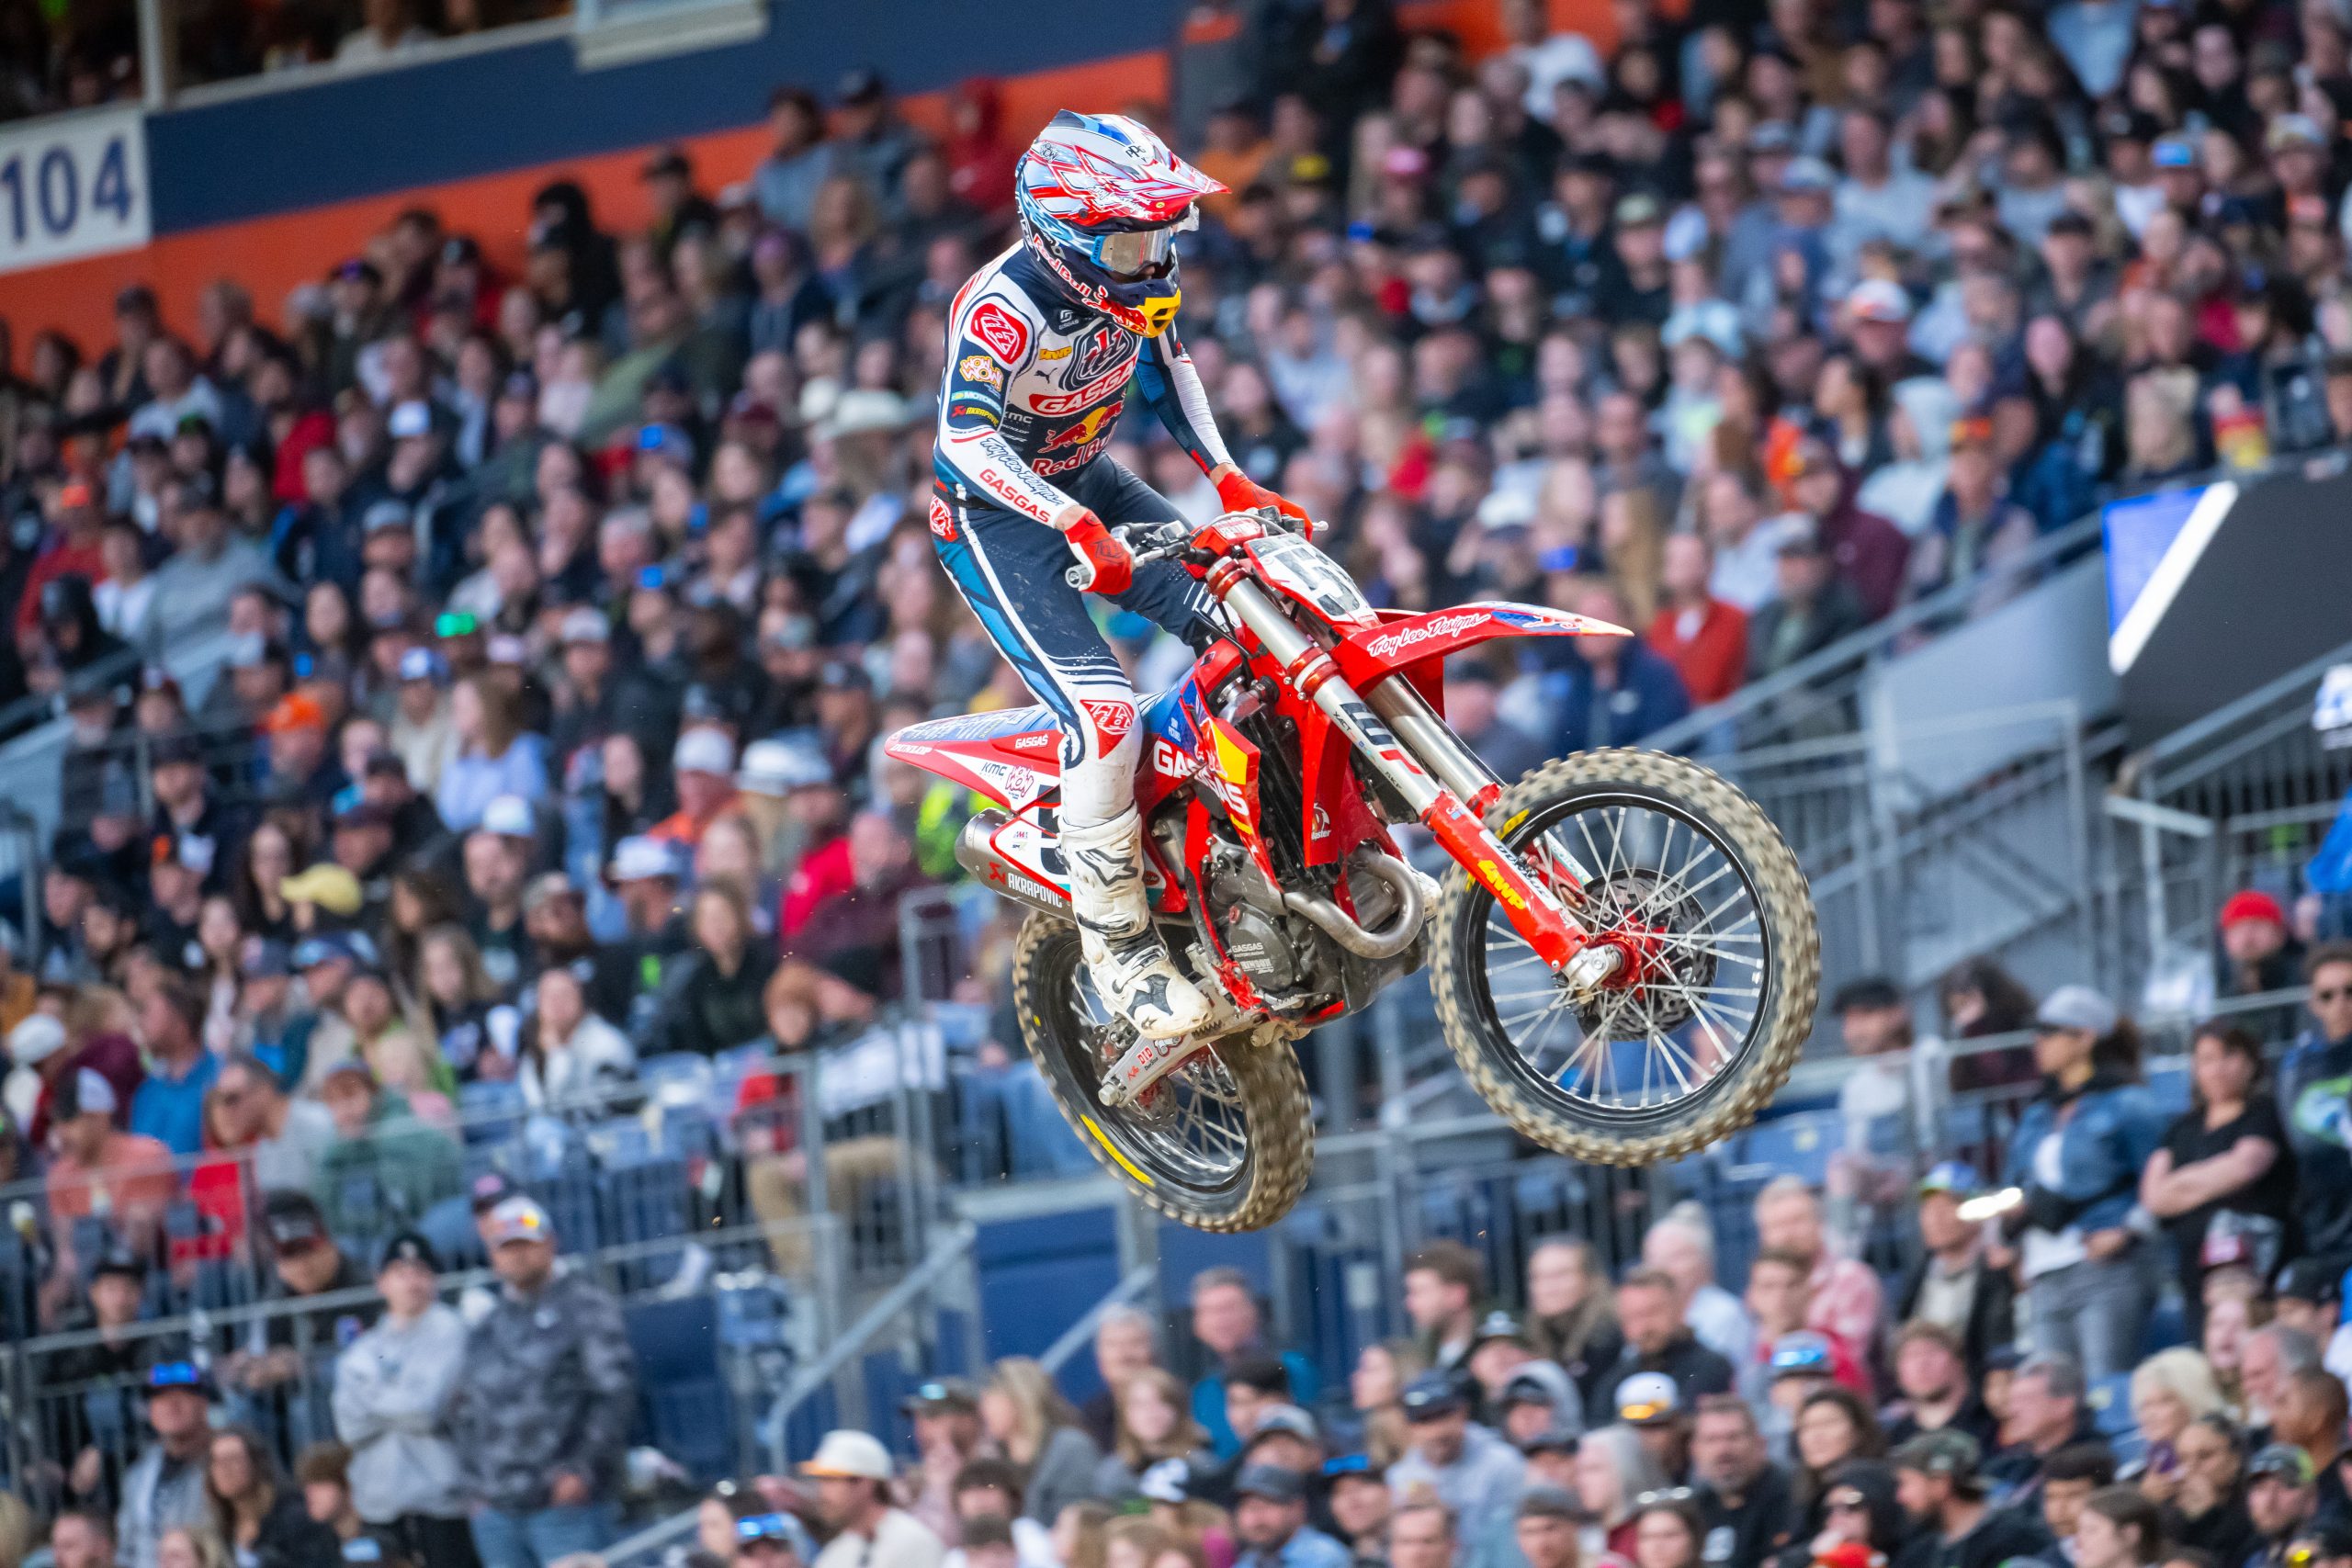 Fourth in Denver Supercross a continuation of Justin Barcia turnaround